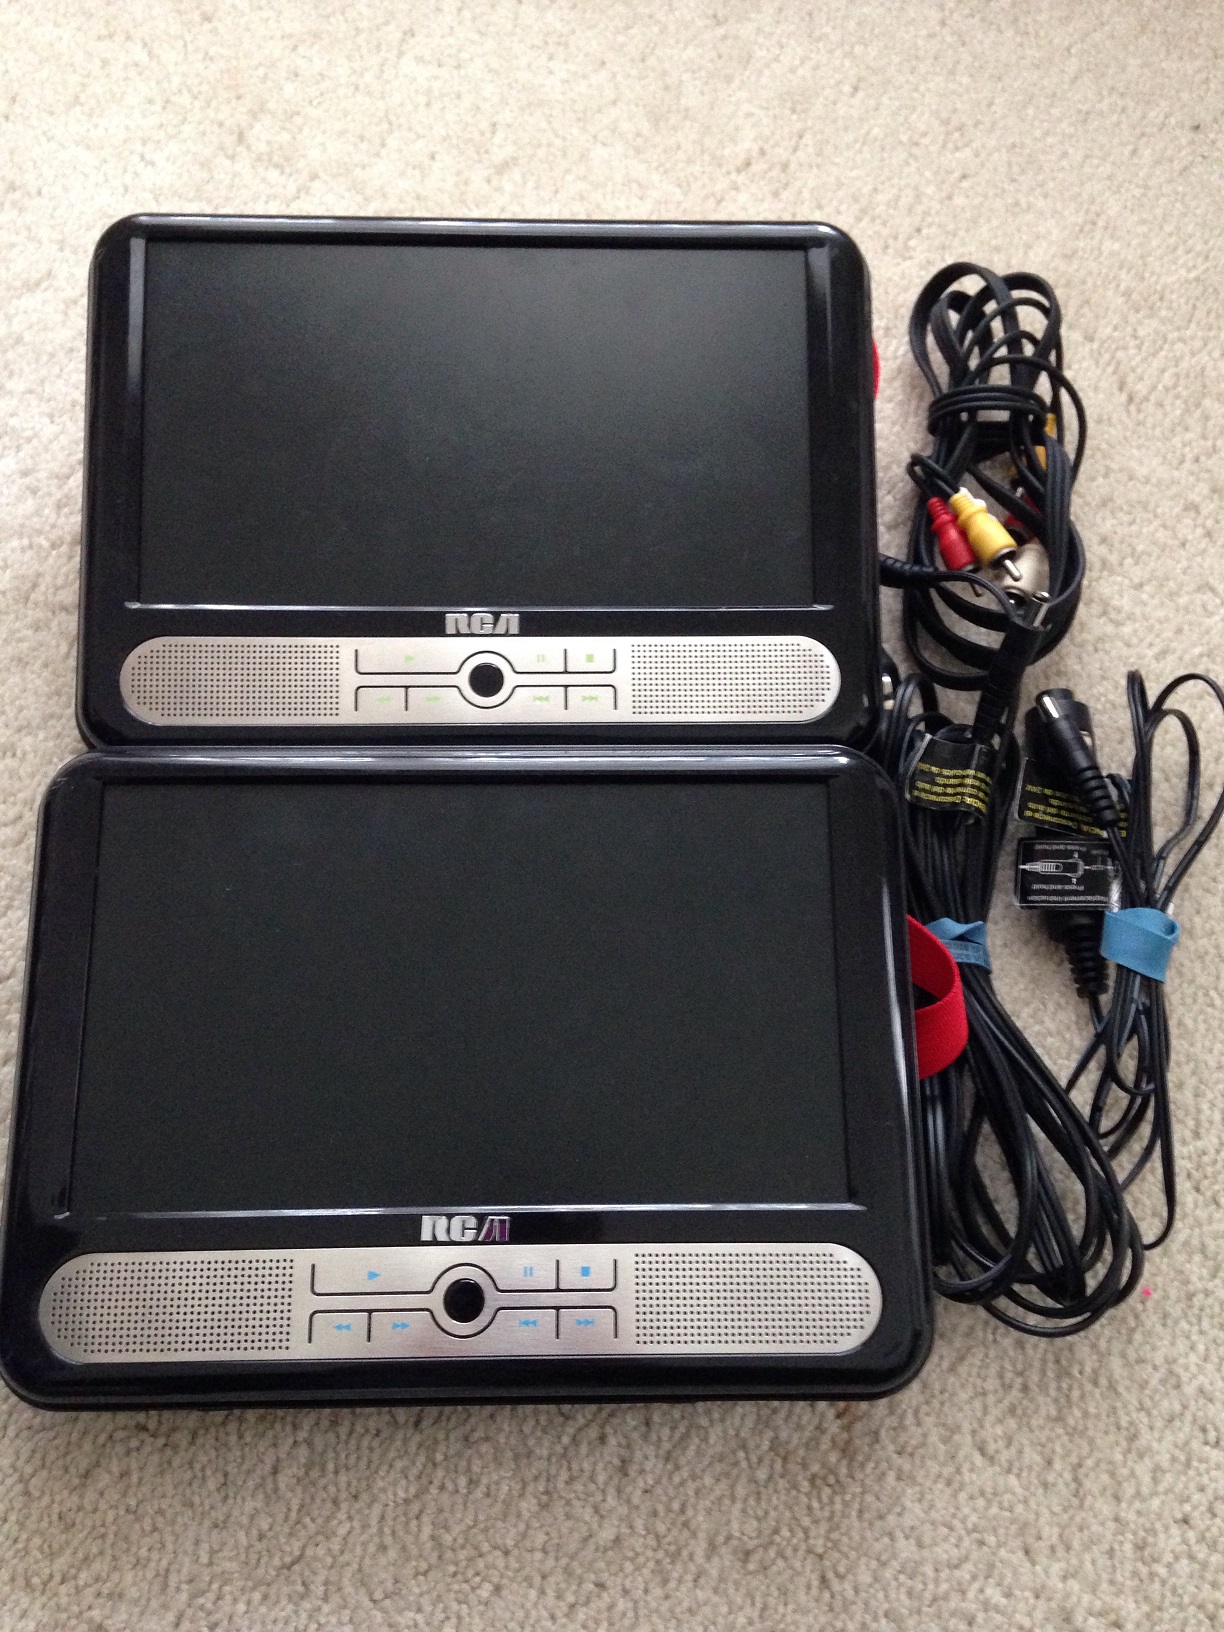 Used  2012 RCA DRC 6296 Twin 9 Inch Mobile DVD Player